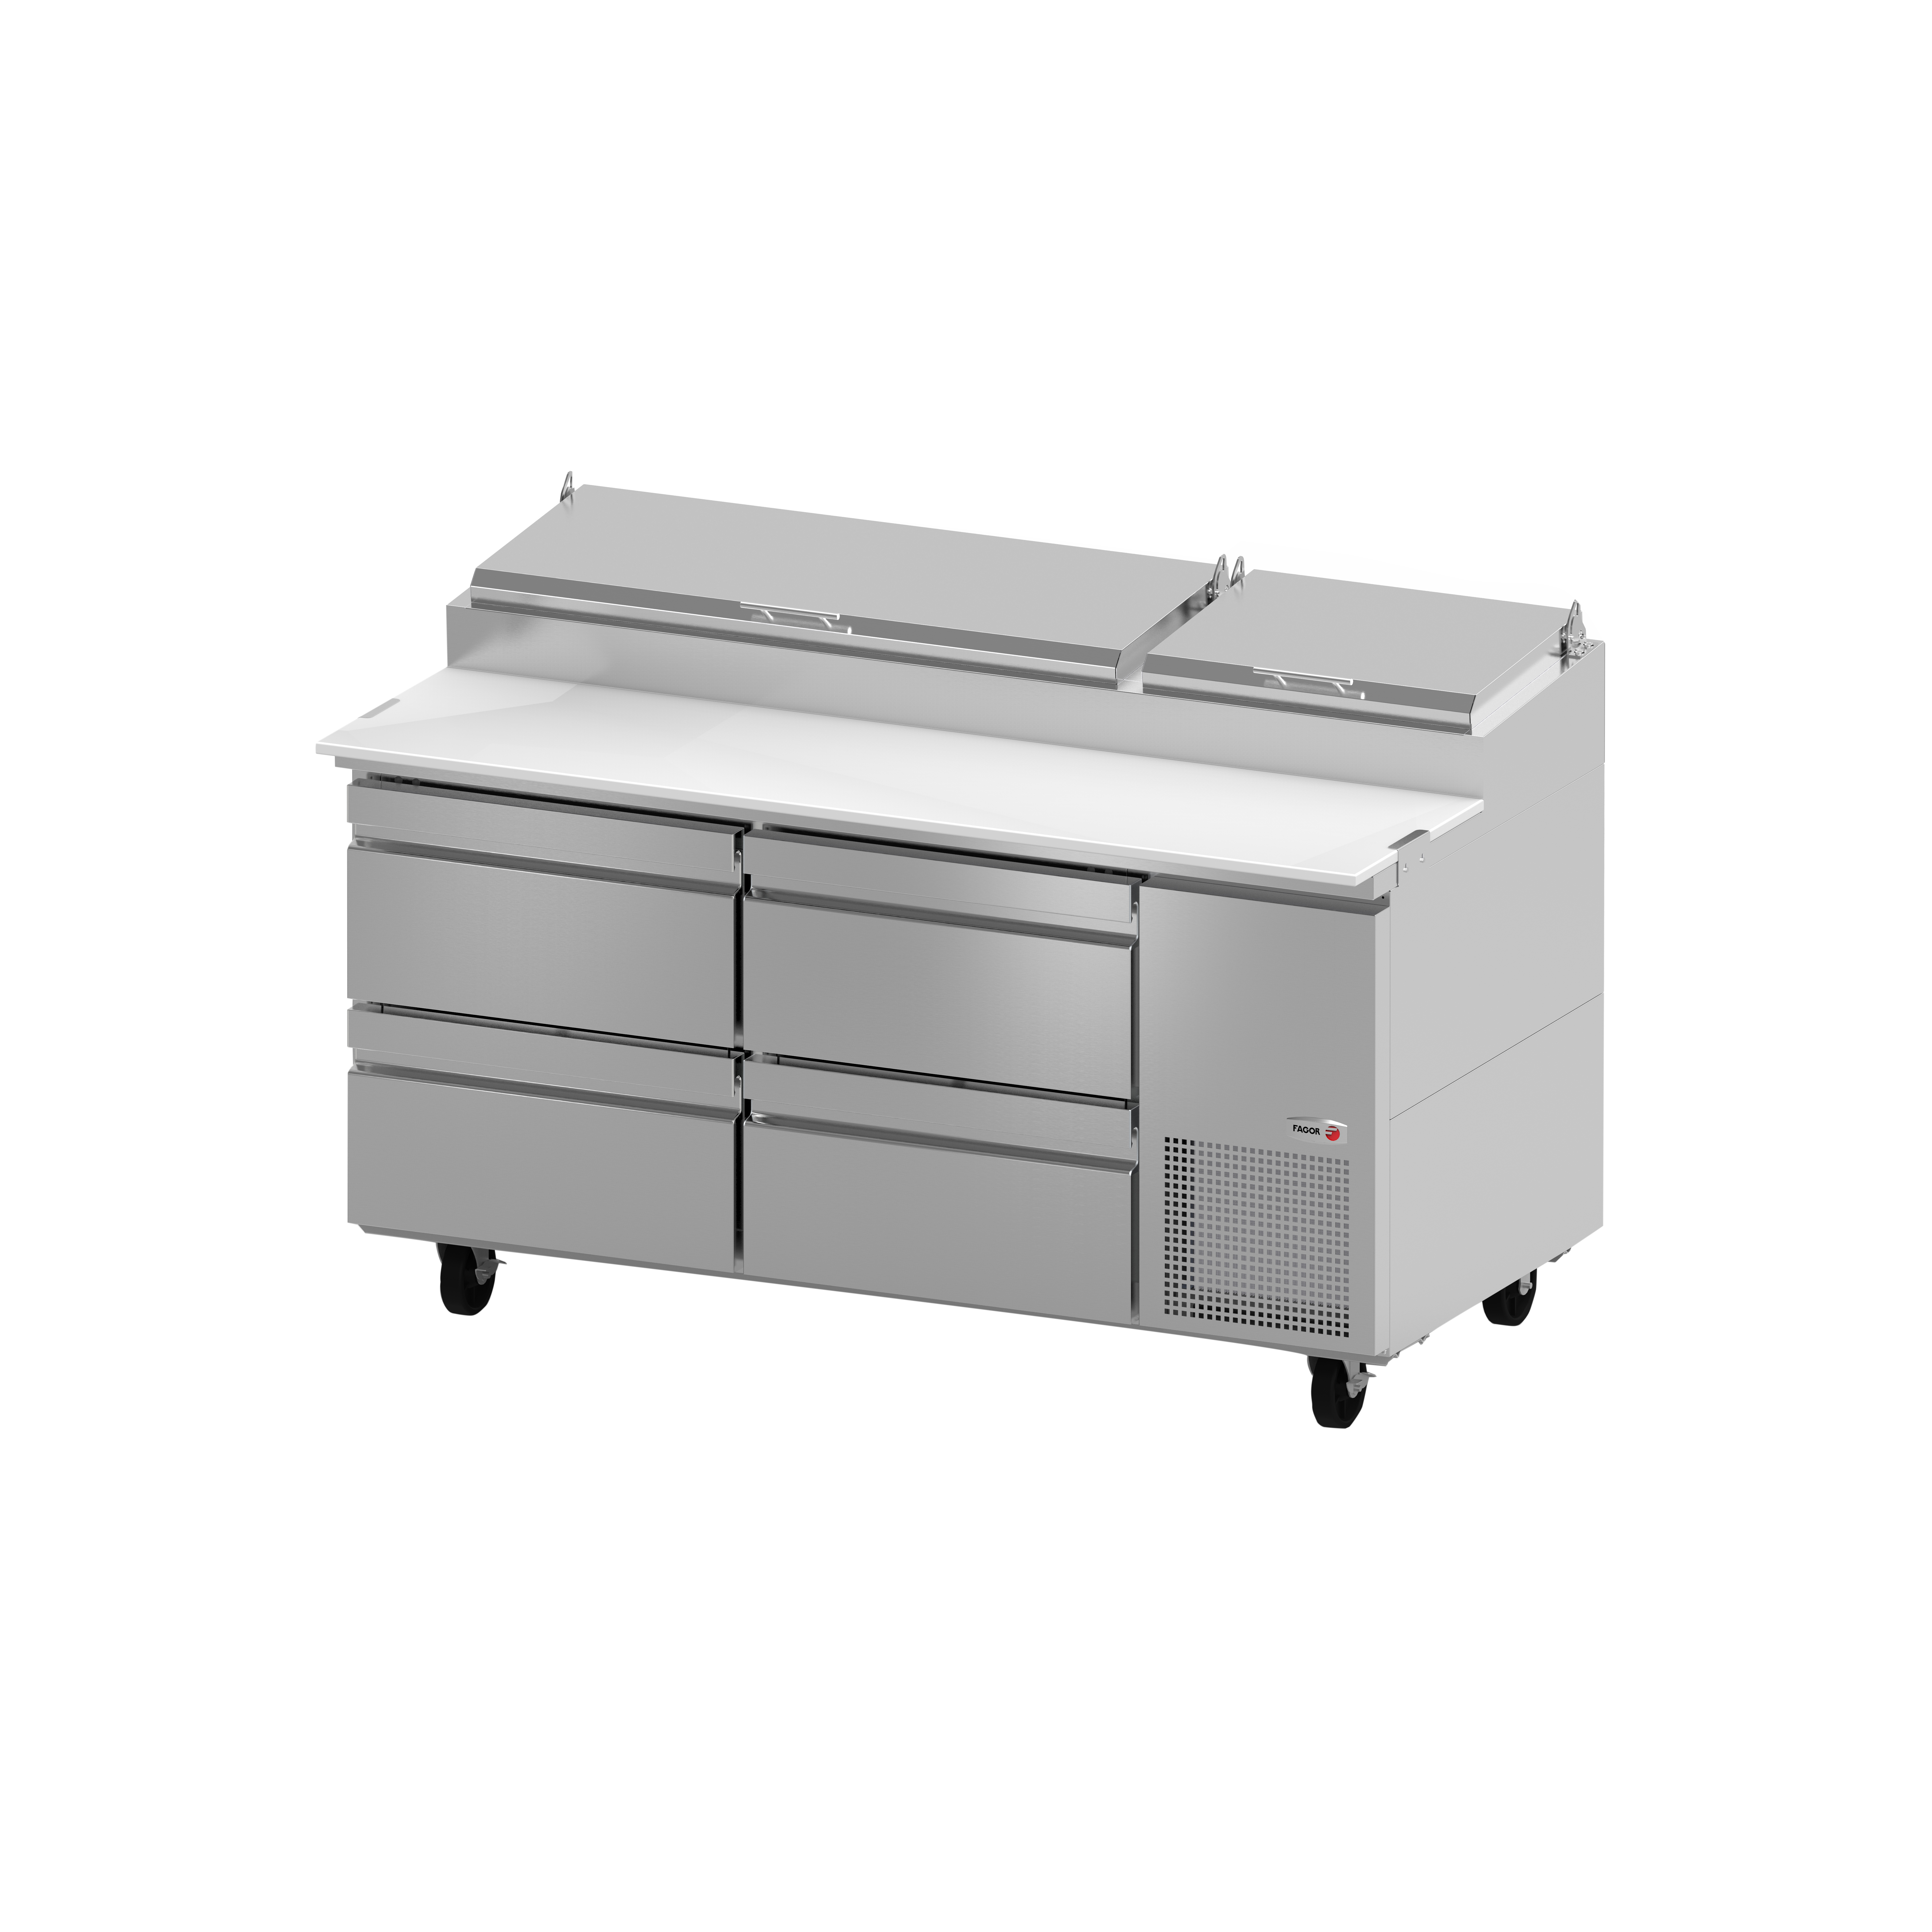 Fagor Refrigeration FPT-67-D4 Pizza Prep Table Refrigerated Counter | eBay